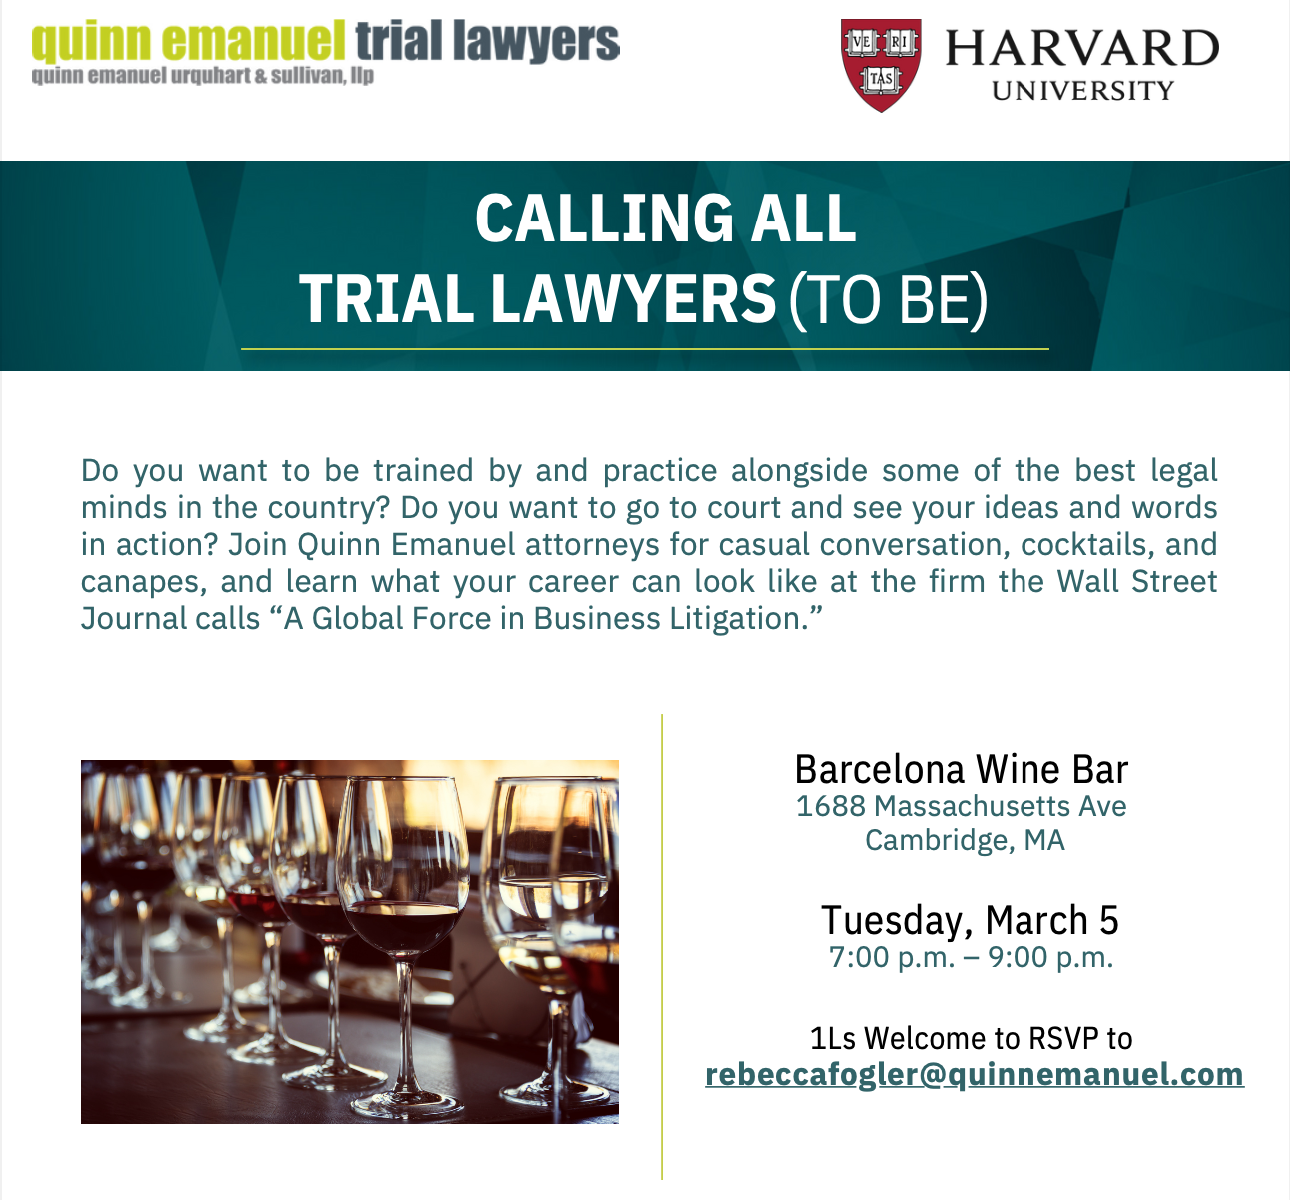 Quinn Emanuel trial lawyers Do you want to be trained by and practice alongside some of the best legal minds in the country? Do you want to go to court and see your ideas and words in action? Join Quinn Emanuel attorneys for casual conversation, cocktails, and canapes, and learn what your career can look like at the firm the Wall Street Journal calls “A Global Force in Business Litigation” Barcelona Wine Bar 1688 Massachusetts Ave Cambridge, MA Tuesday, March 5 7:00 - 9:00 pm 1Ls Welcome to RSVP to rebeccafogler@quinnemanuel.com